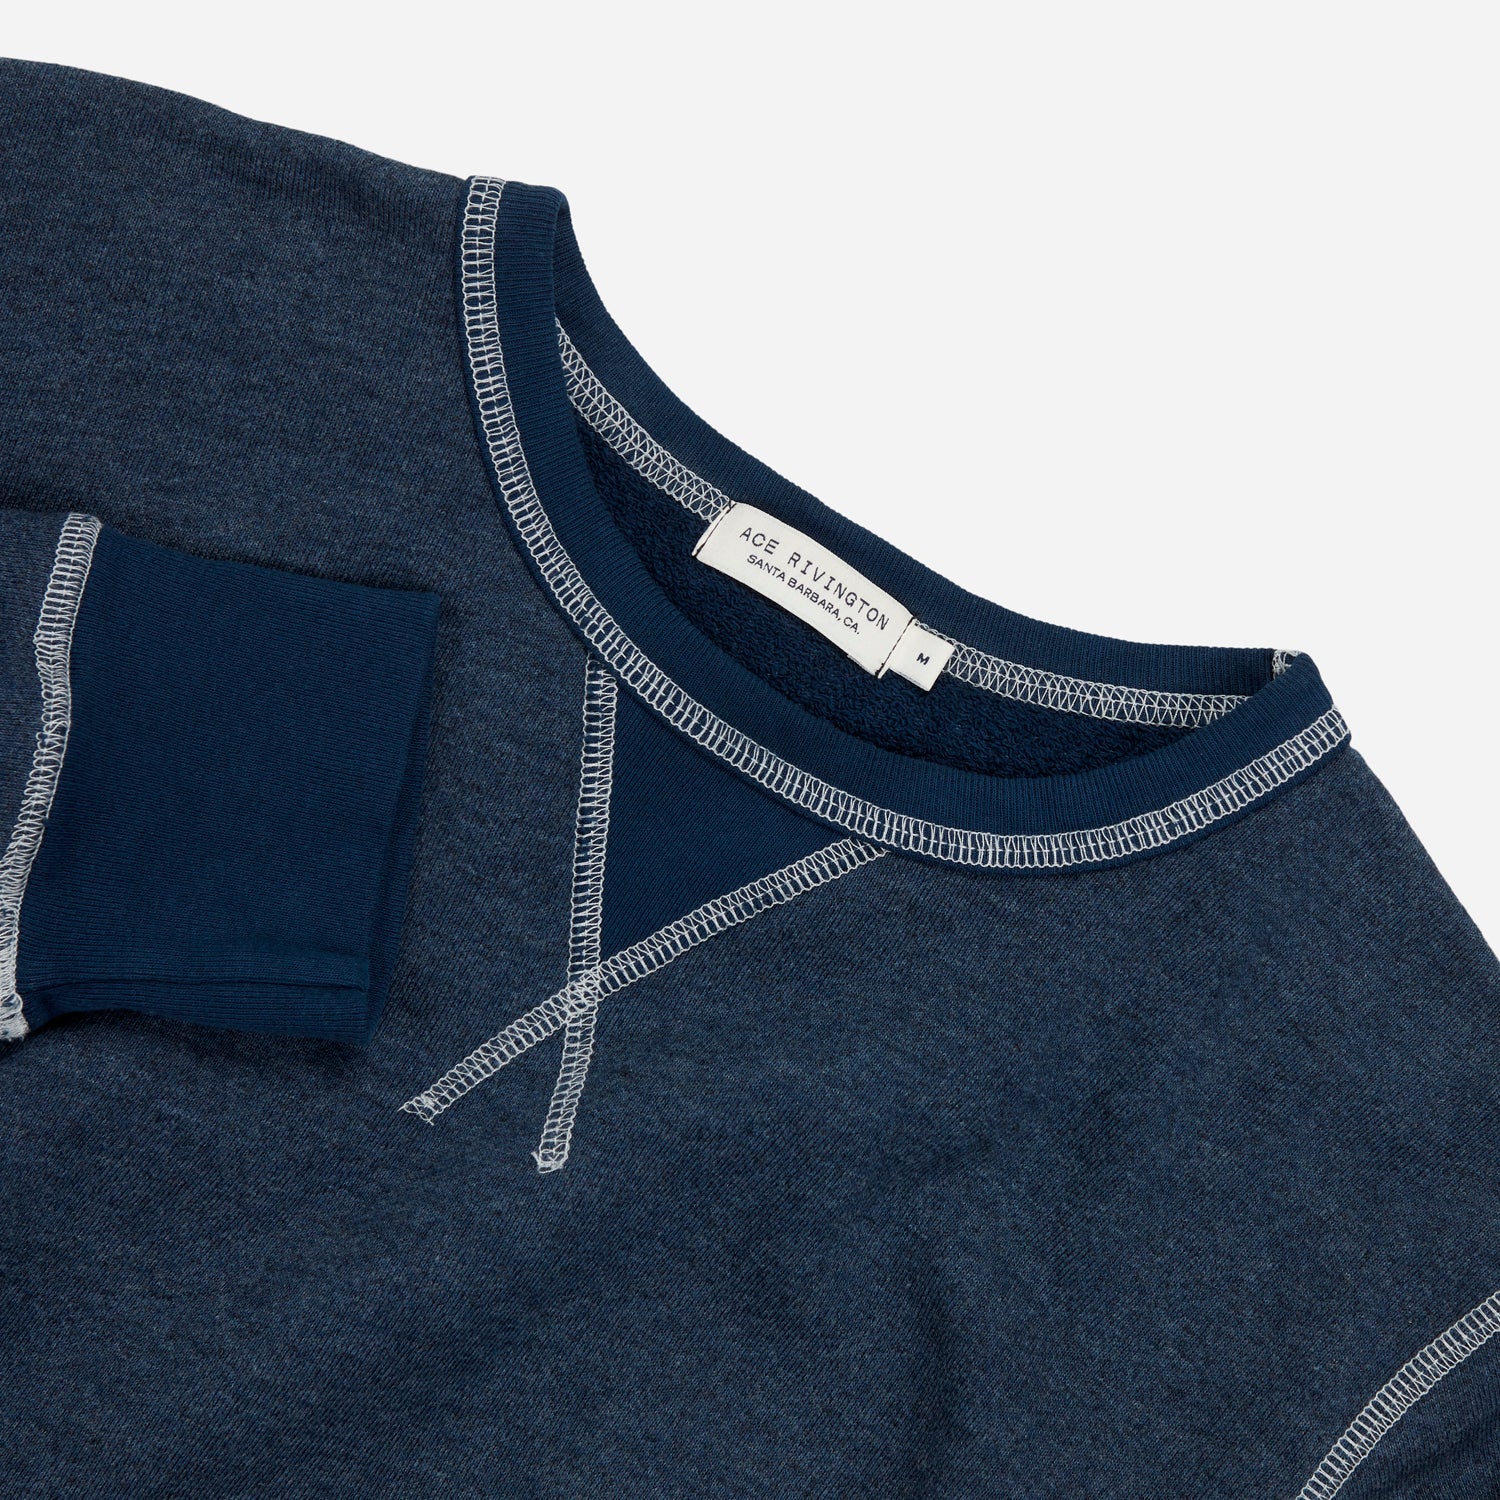 angled aerial view from above of men's navy blue homespun french terry crew neck sweatshirt with white accent stitching and Ace Rivington logo tag in medium